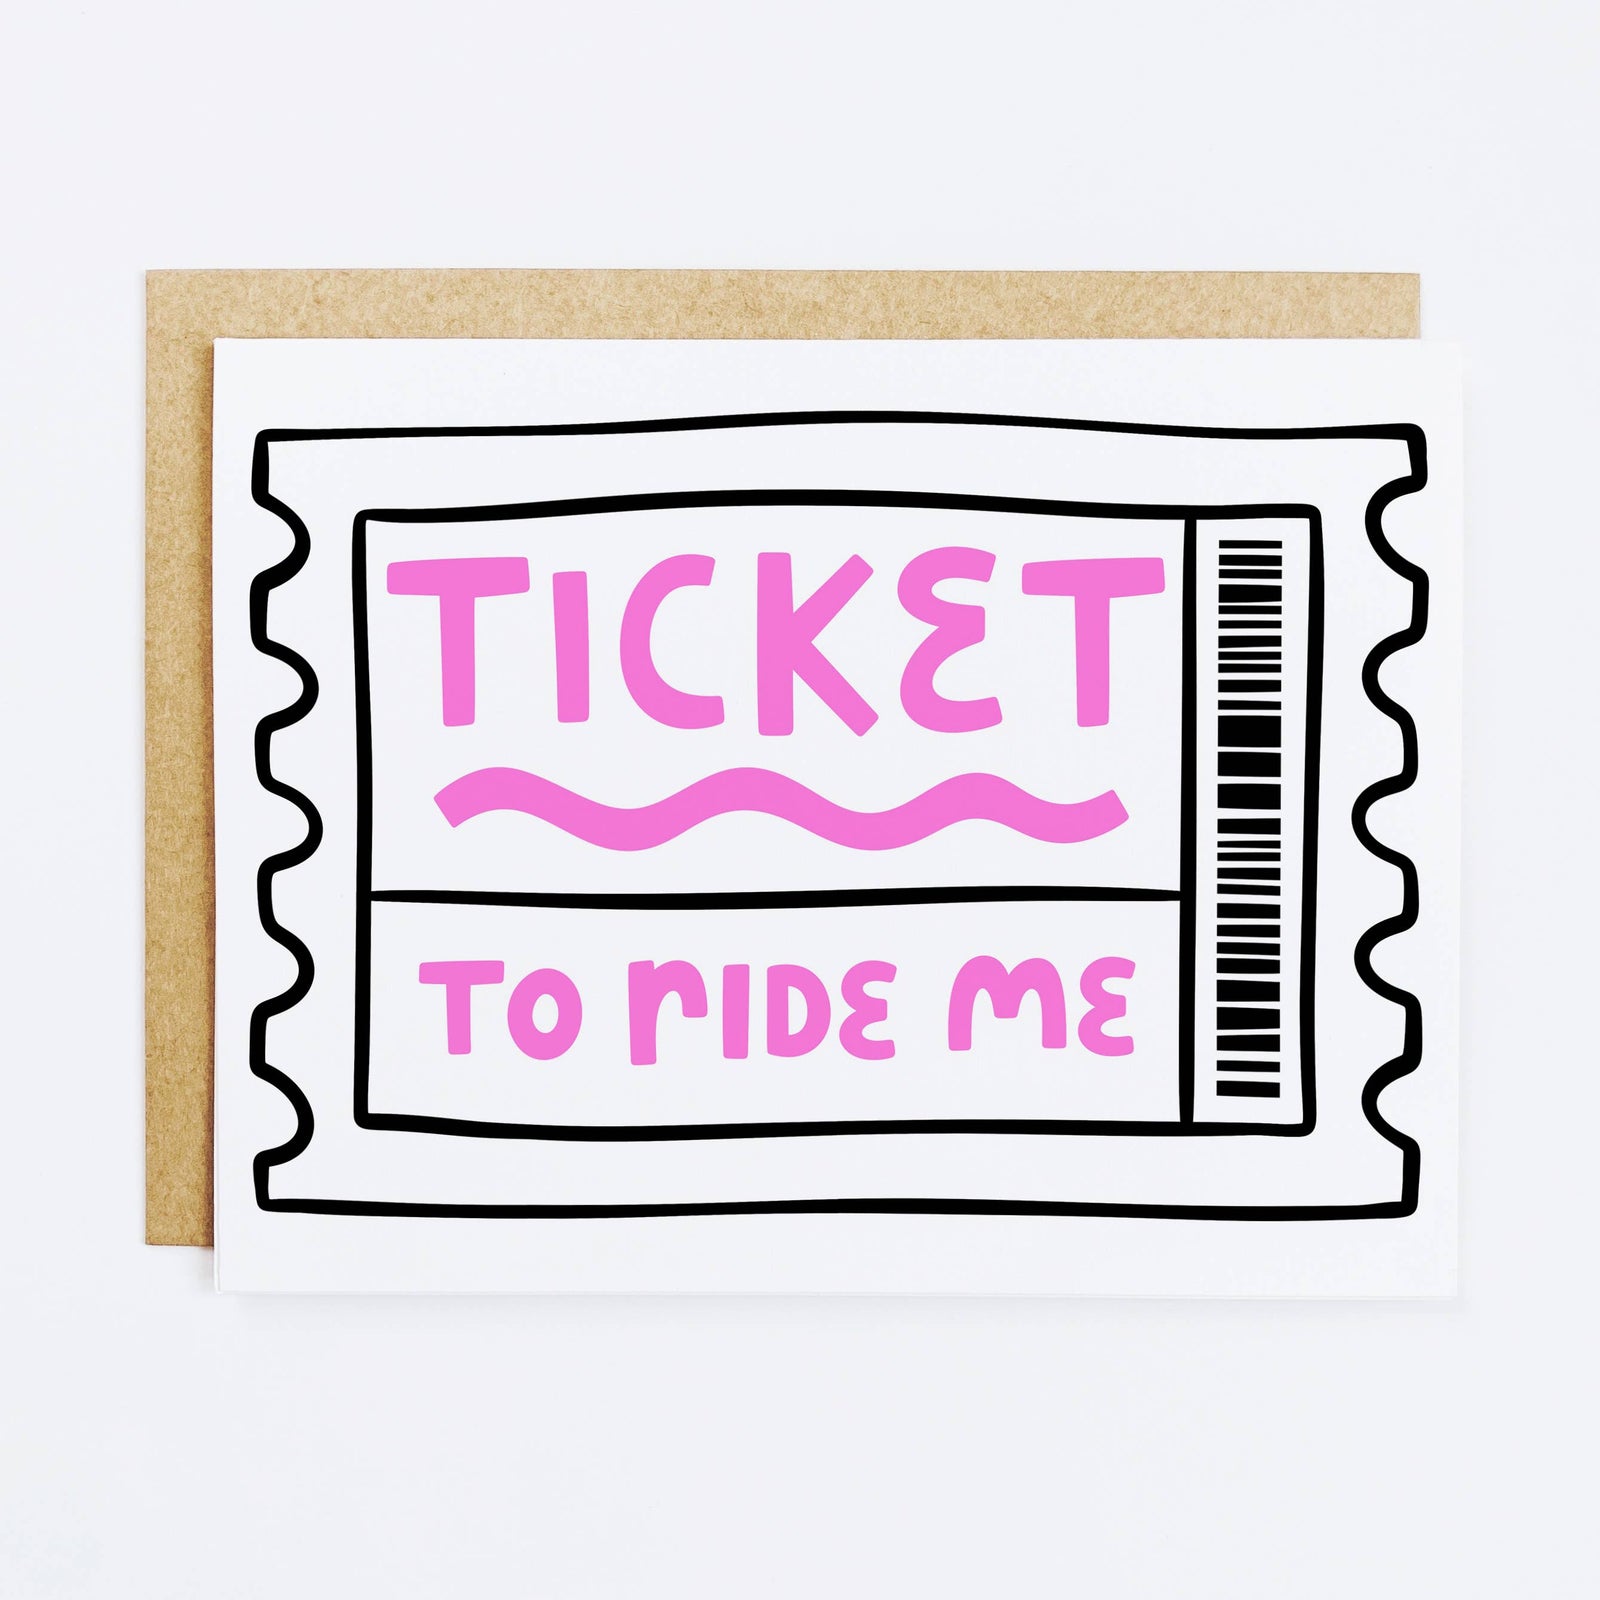 Ticket To Ride Me Greeting Card